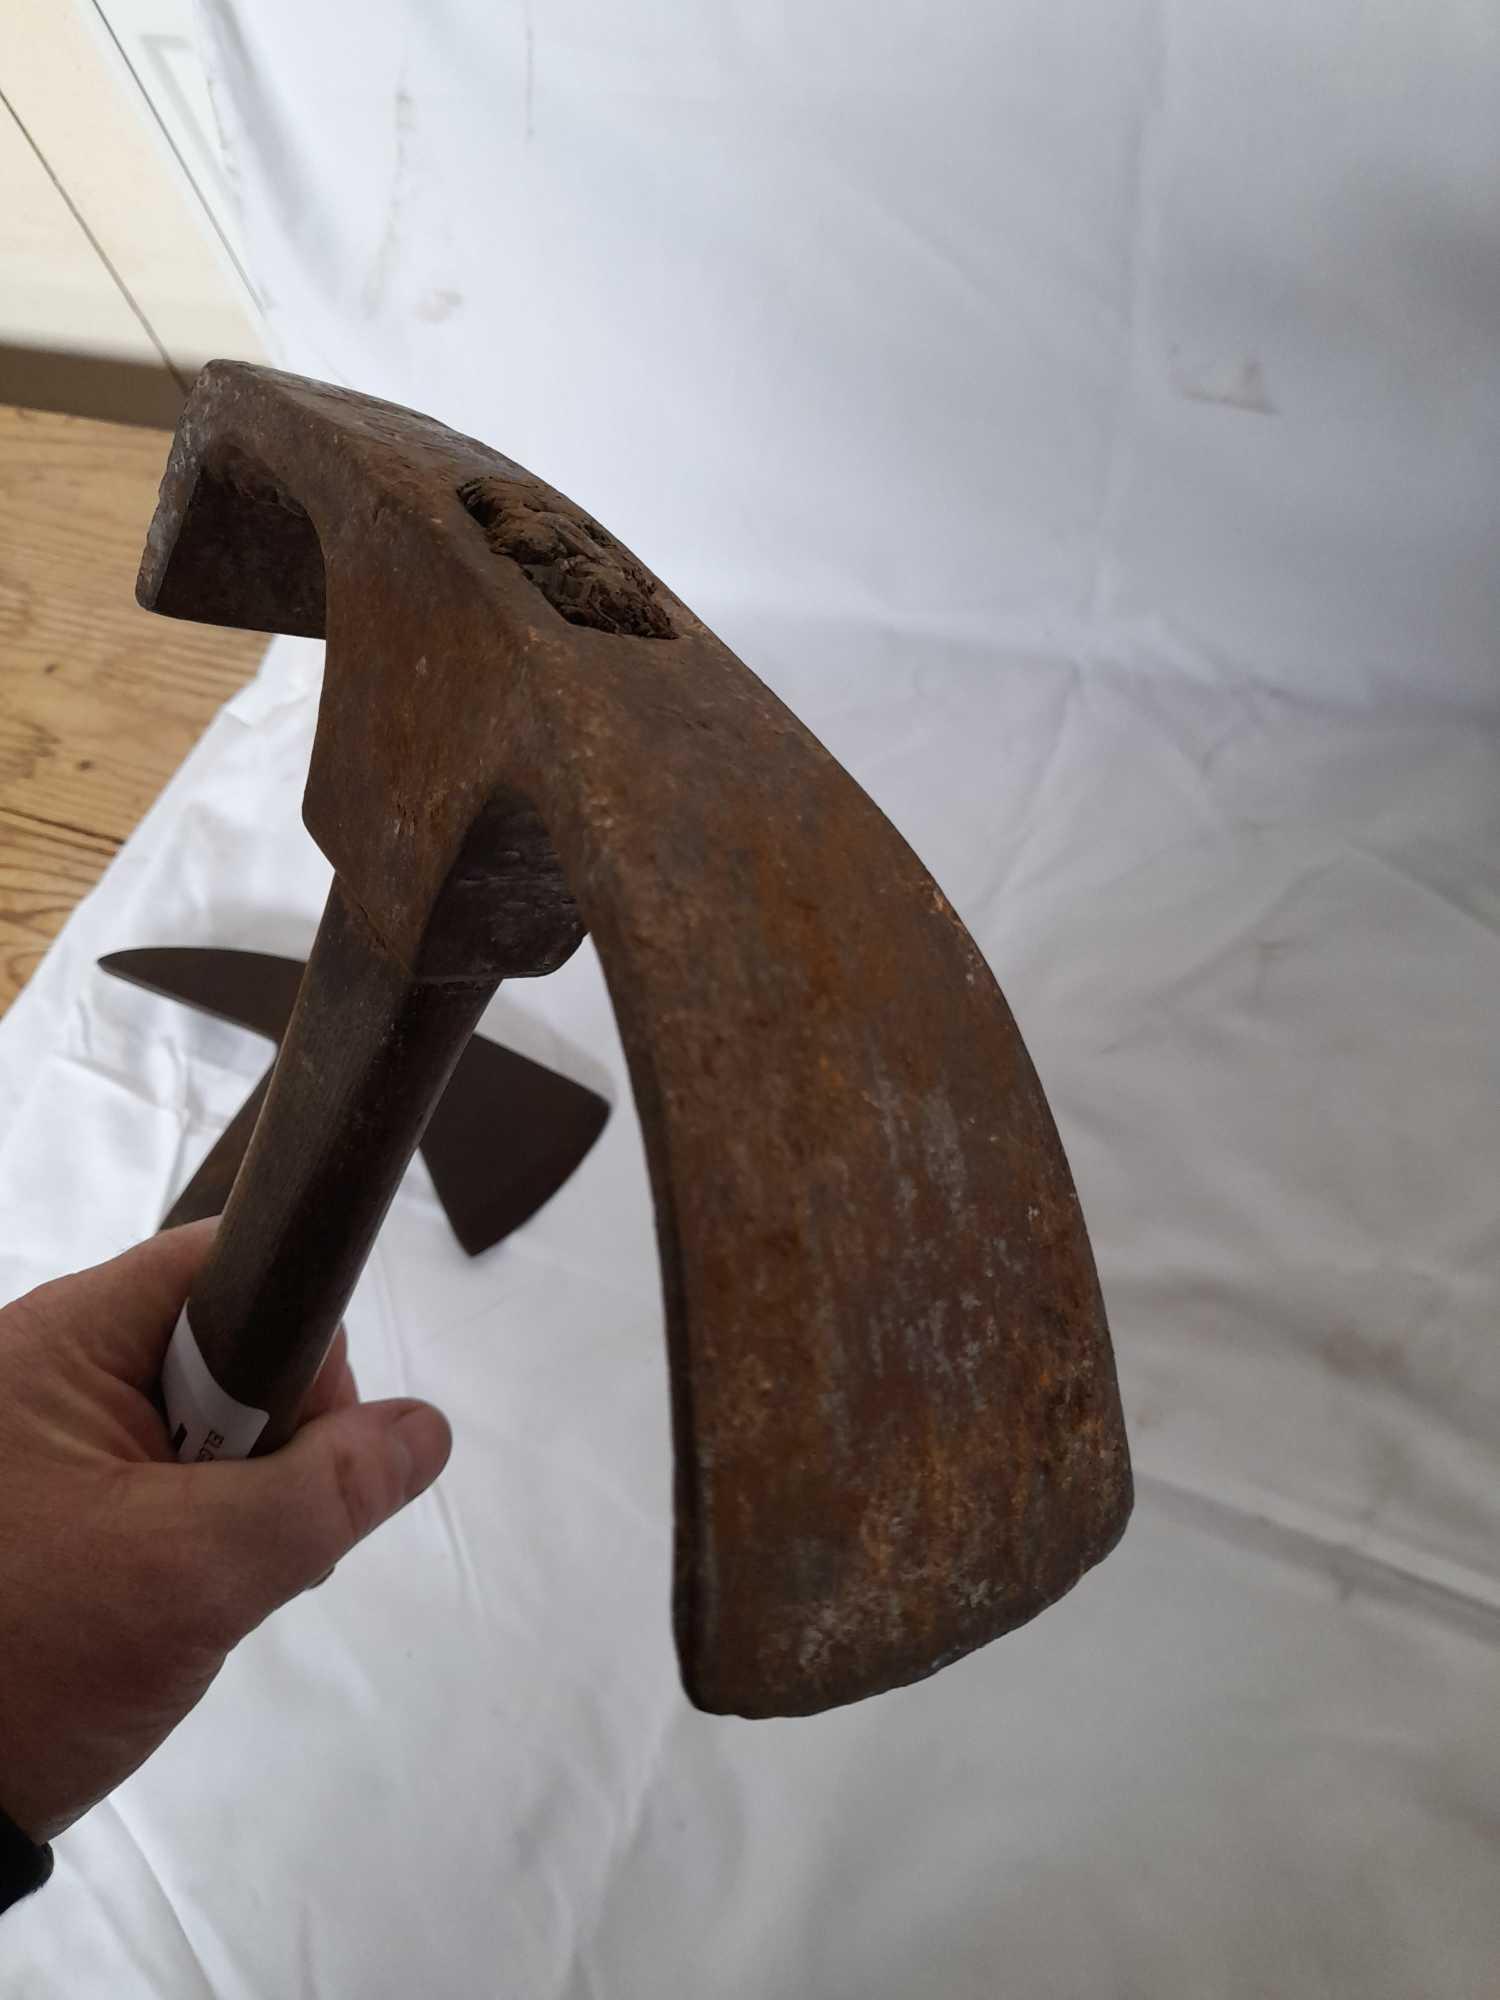 FIREMANS AXE & COOPERS TOOL - Image 8 of 9